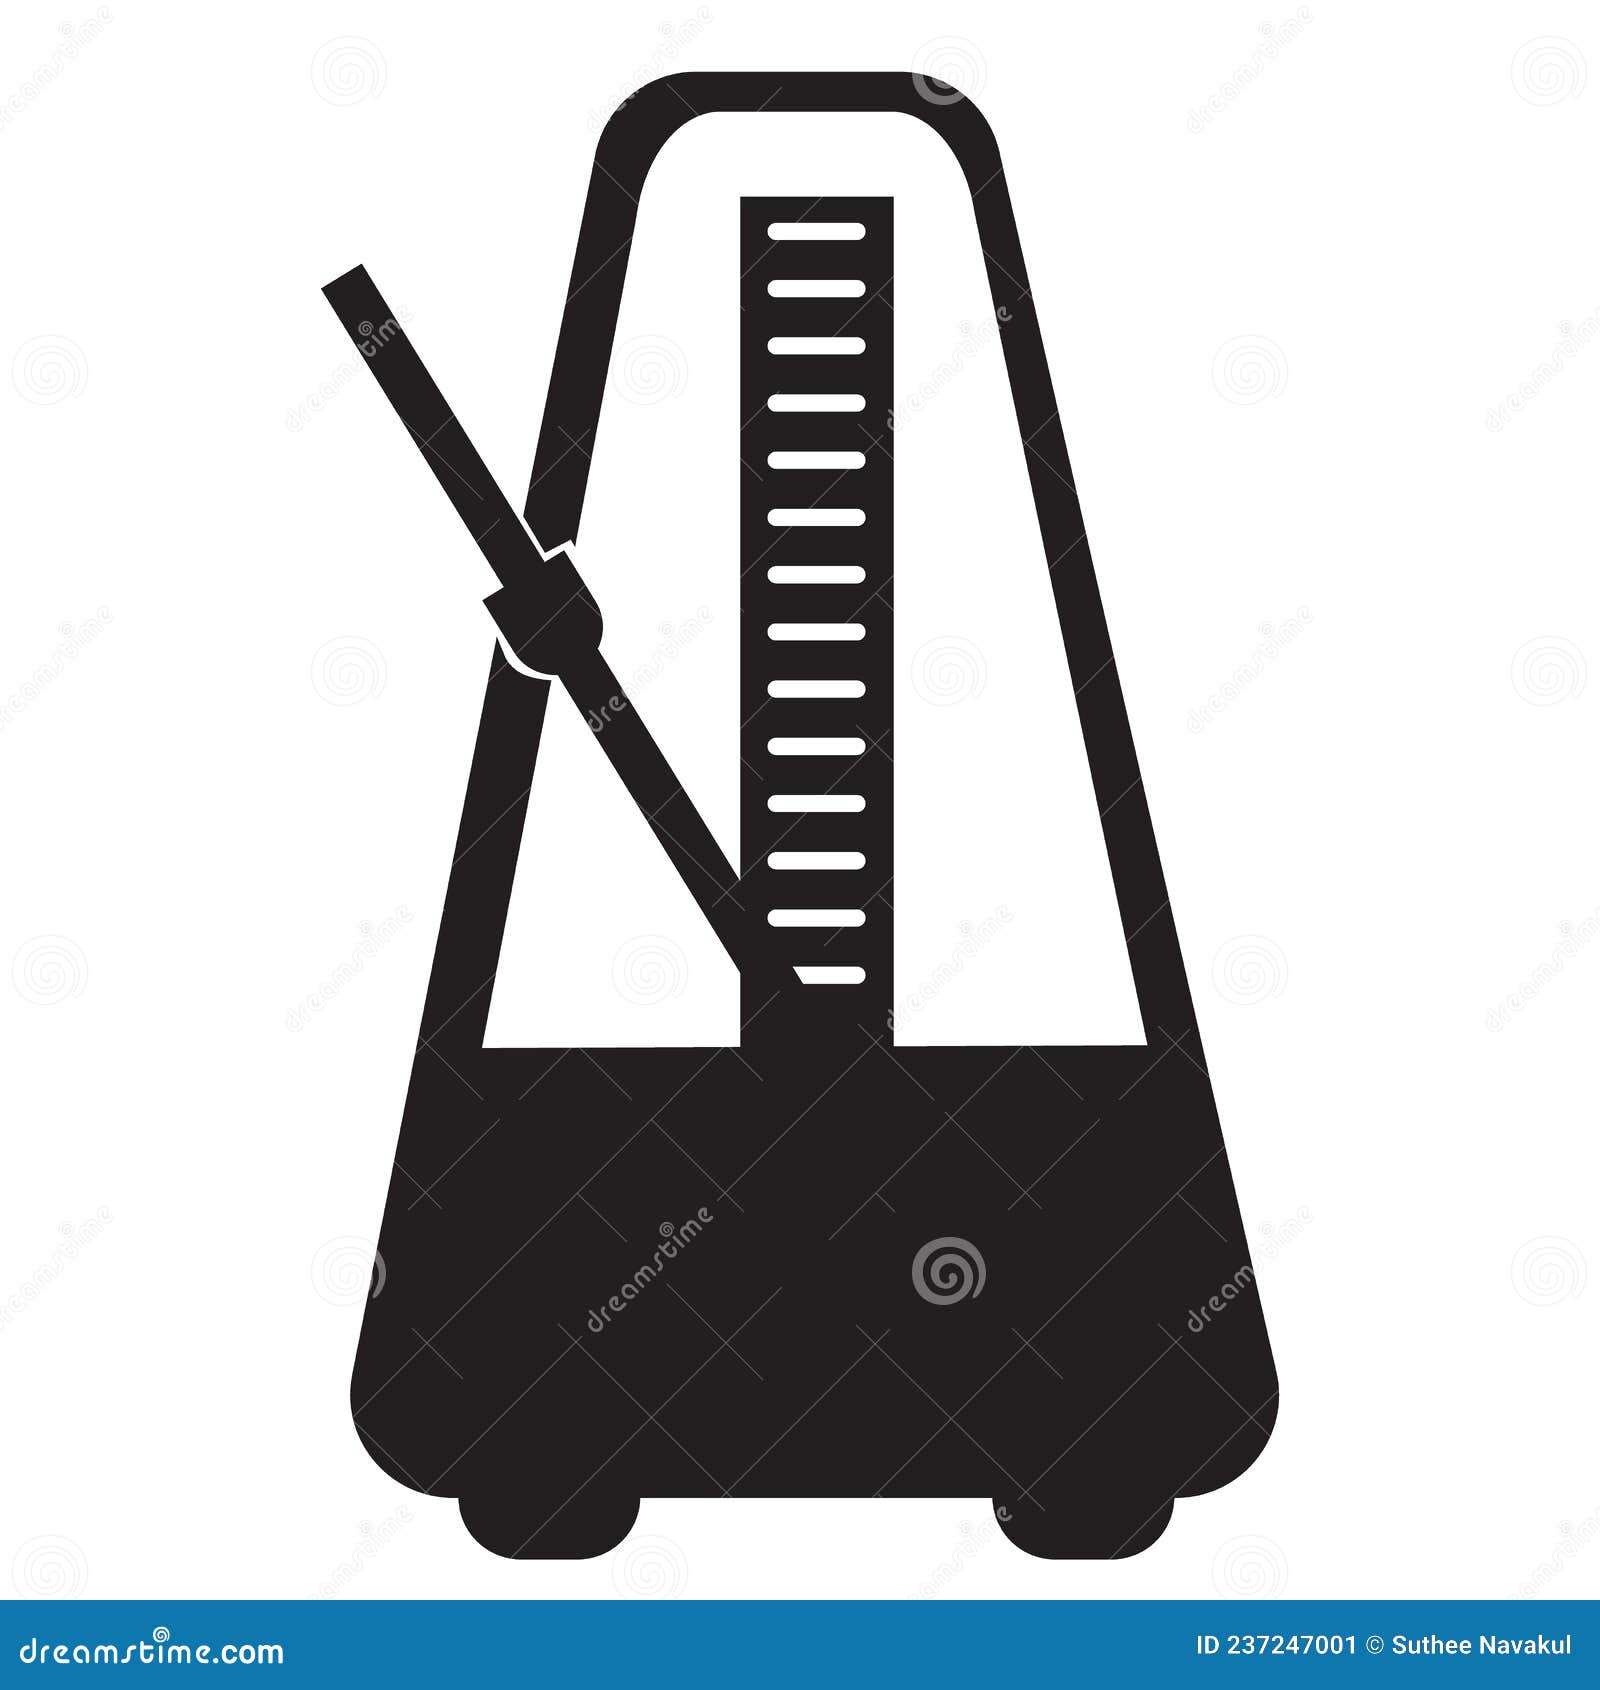 metronome icon on white background. music and instrument . tempo sign. flat style